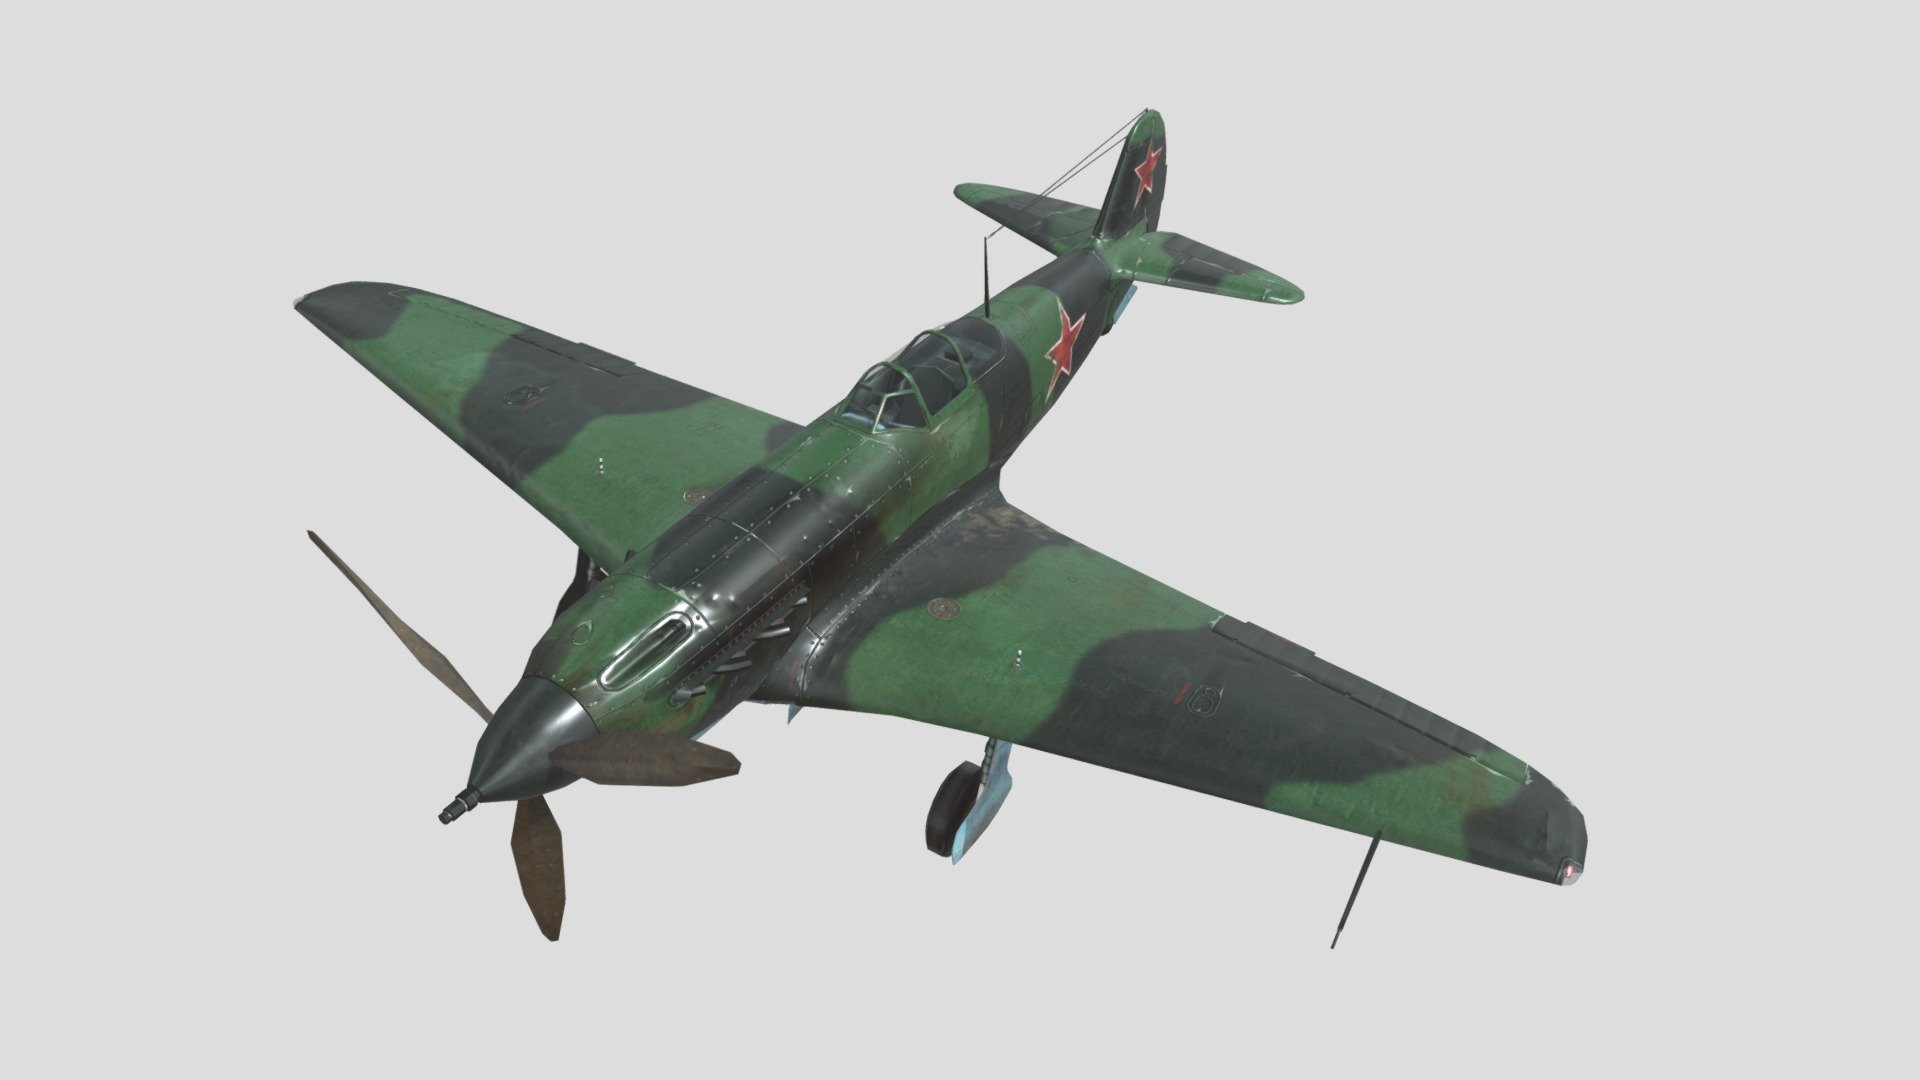 The Yak-9 is a single-engine fighter aircraft used by the Soviet Union during World War II and beyond. . The Yak-9 fighter is the last model of the Yak series of fighters. It is a modification of the Yak-7 with an all-metal wing. It was developed in 1942 and has long-range, ground attack, trainer and other models. It was one of the main fighter types of the Soviet Union during World War II. 16,769 aircraft were produced, making it the largest fighter fleet 3d model